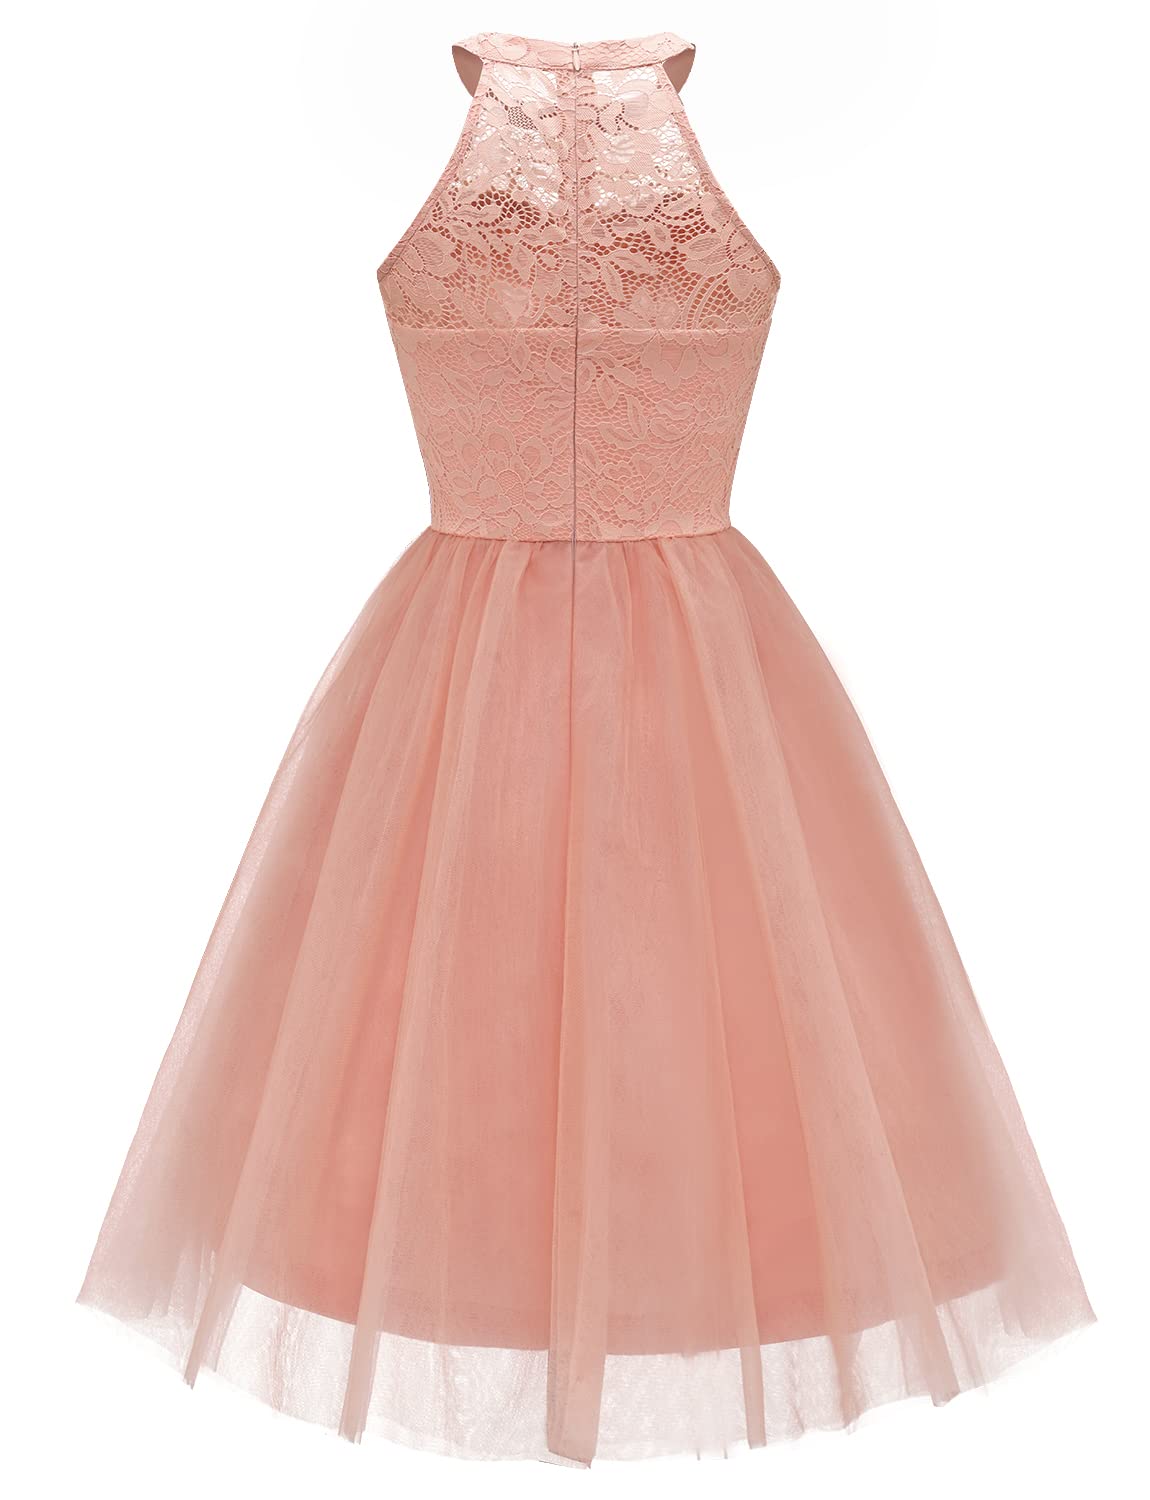 Dressystar Short Halter Prom Ball Gown Lace Tulle Evening Homecoming Dress 0068 Blush L